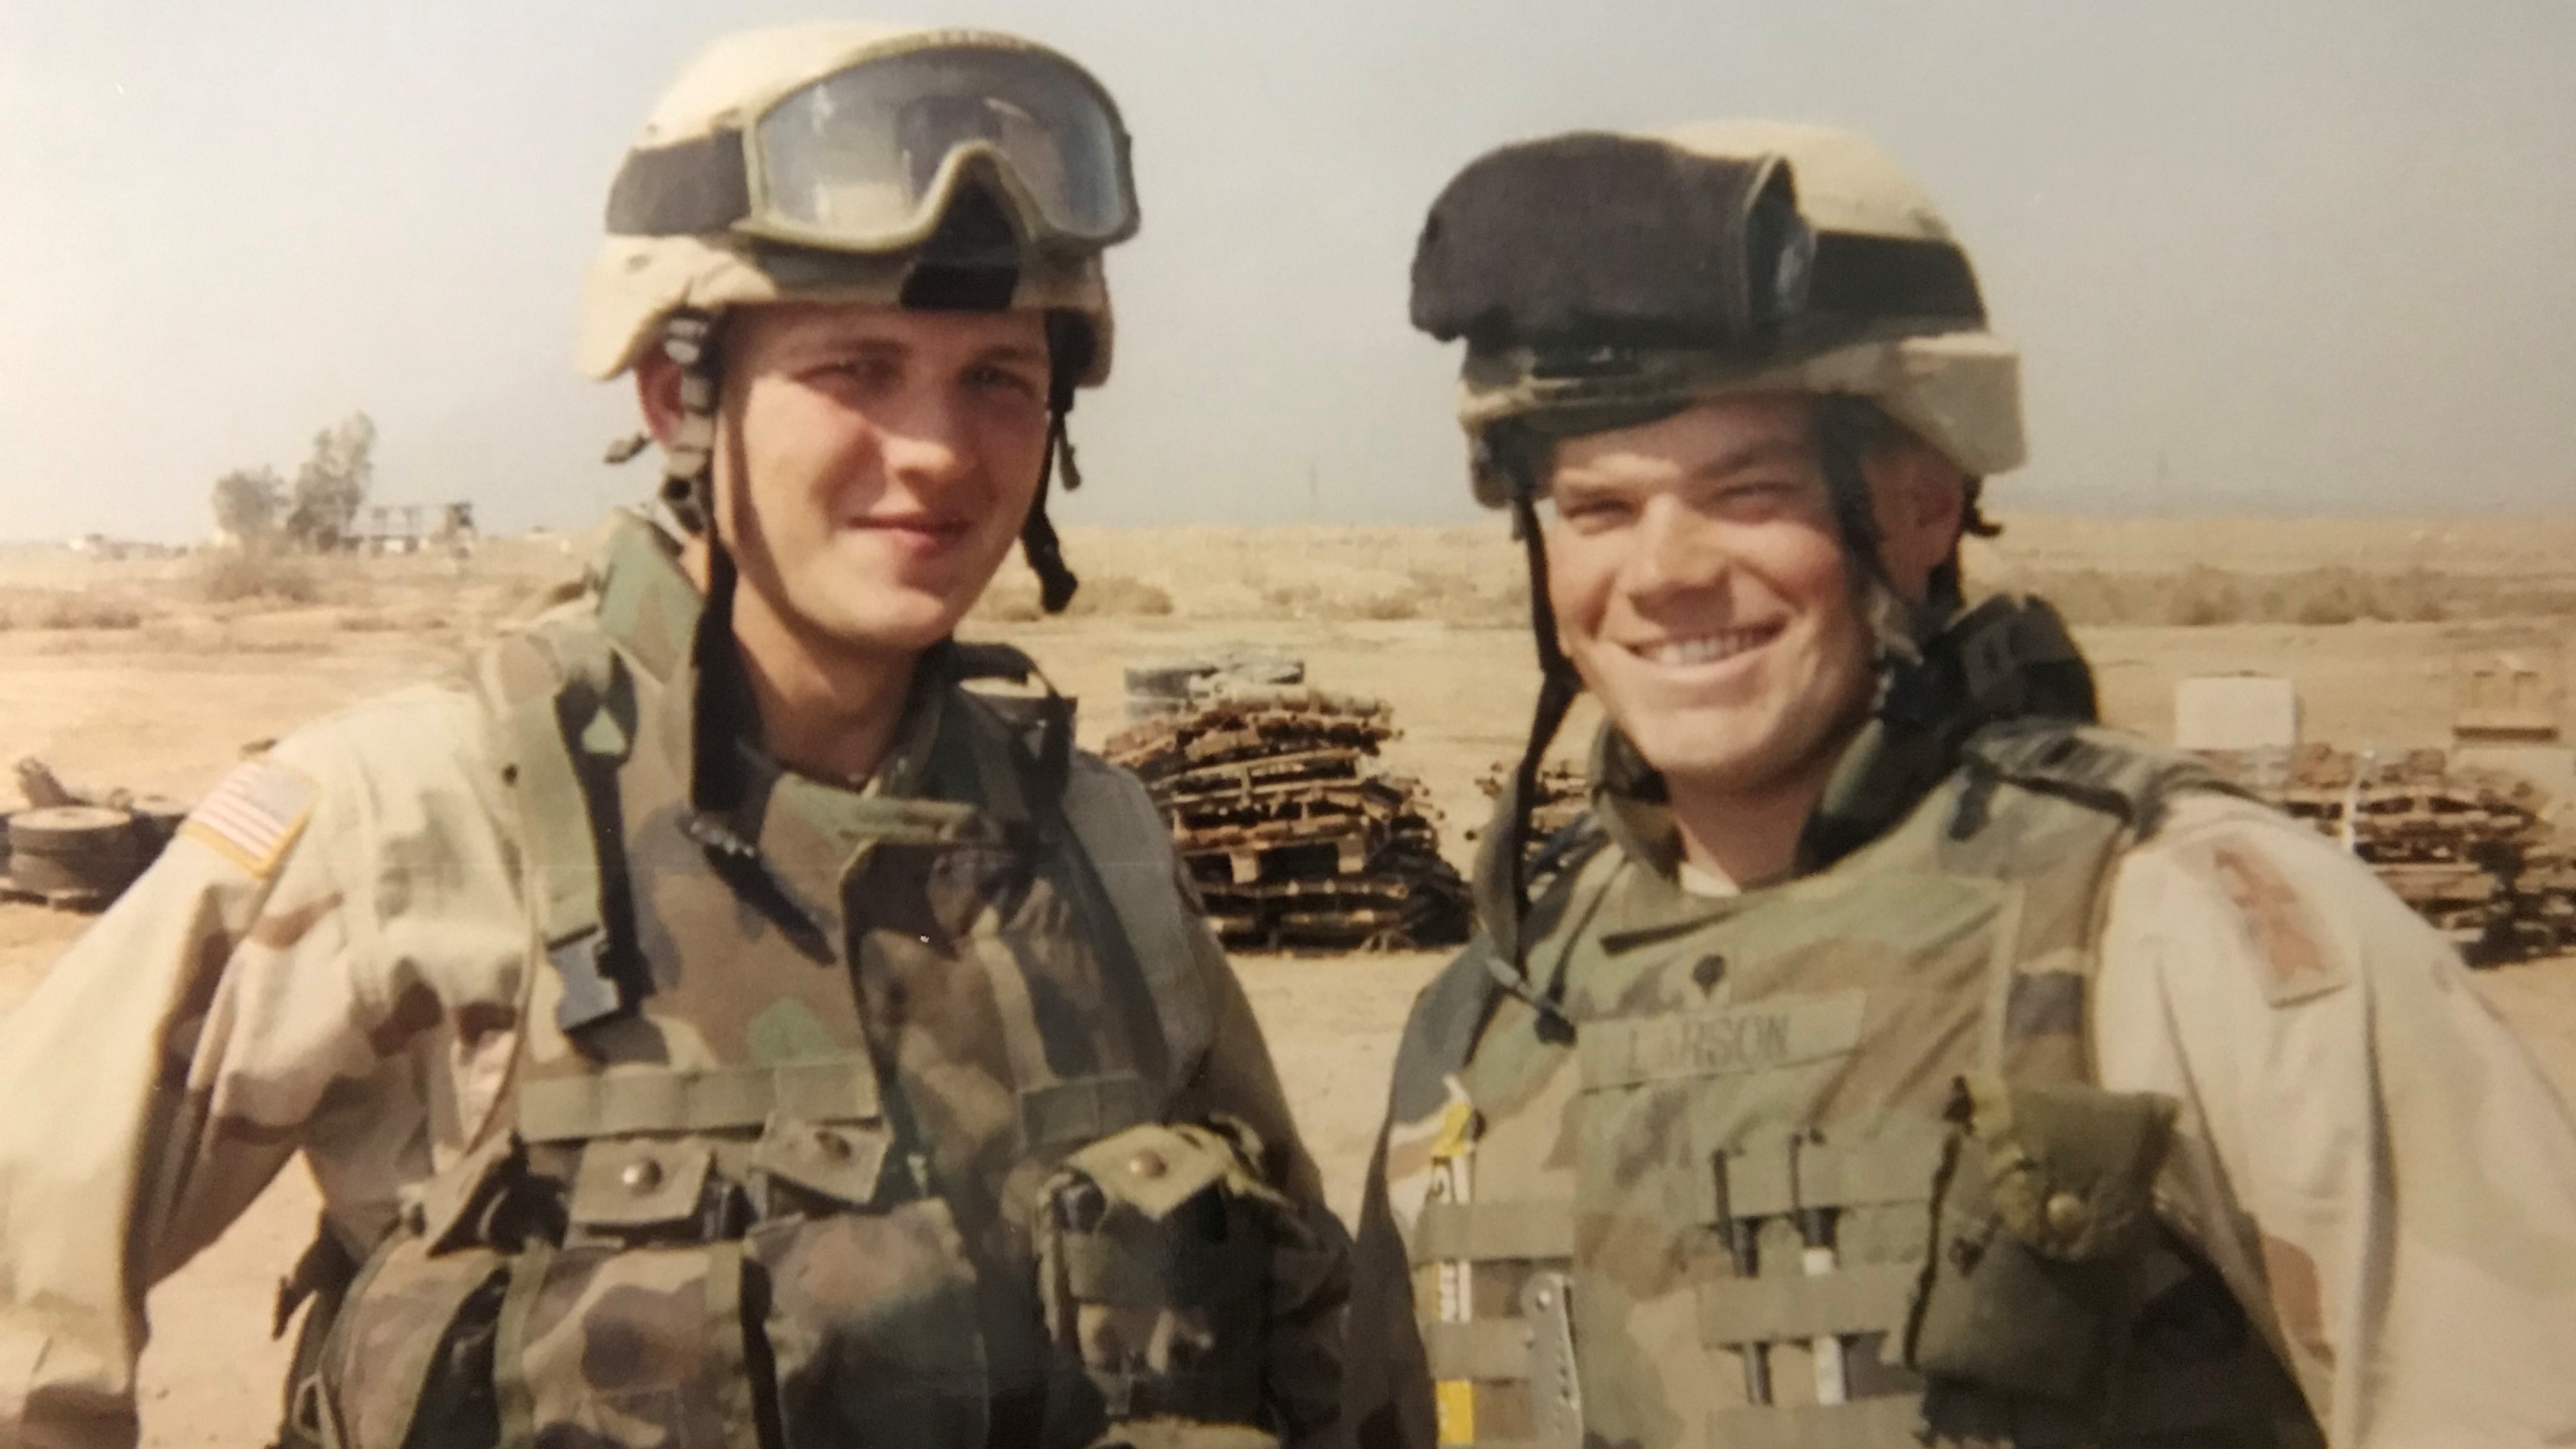 Jake and his friend in Iraq